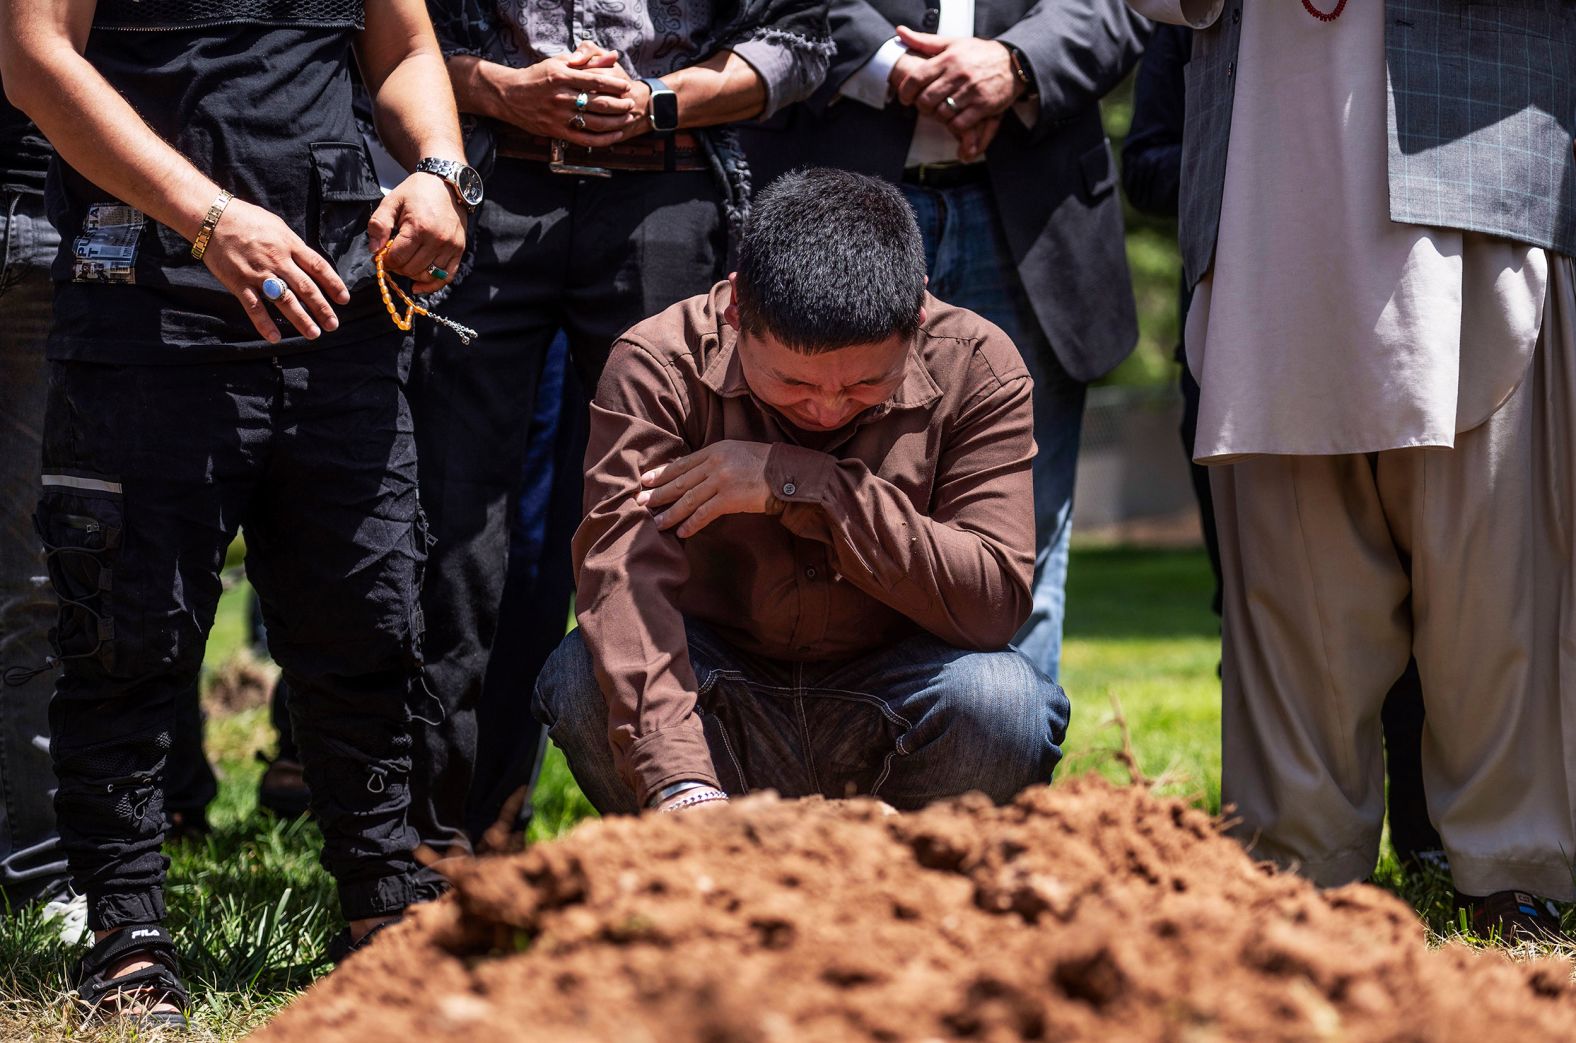 Altaf Hussain cries over the grave of his brother Aftab during a funeral in Albuquerque, New Mexico, on Friday, August 5. The potentially linked ambush-style shootings of three Muslim men and the recent killing of a fourth in Albuquerque <a href="https://www.cnn.com/2022/08/08/us/albuquerque-muslim-men-killings-monday/index.html" target="_blank">have alarmed the city's Muslim community,</a> leaving it grappling with fear as police announced they have detained a suspect.